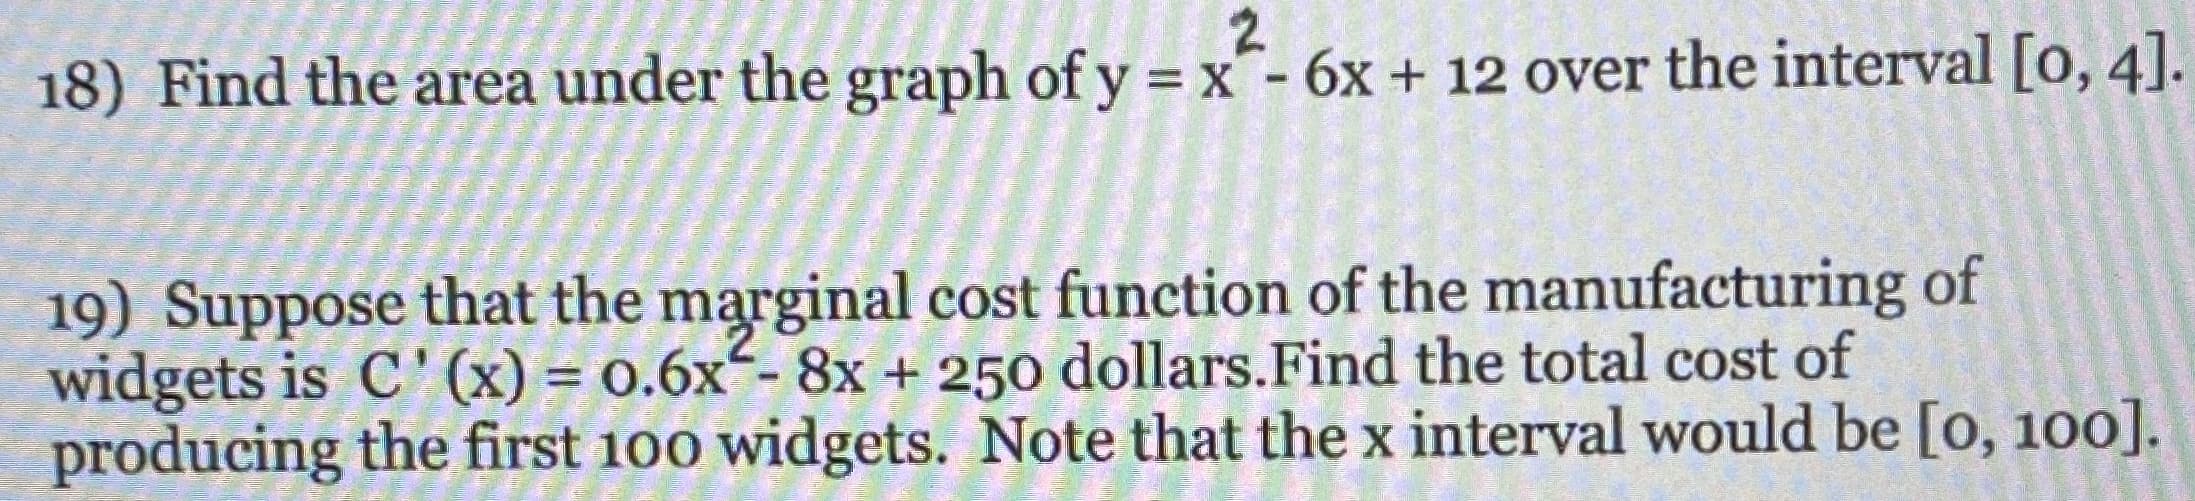 2.
18) Find the area under the graph of y = x- 6x + 12 over the interval [o, 4].
19) Suppose that the marginal cost function of the manufacturing of
widgets is C'(x) = 0.6x- 8x + 250 dollars.Find the total cost of
producing the first 100 widgets. Note that the x interval would be [o, 100].
